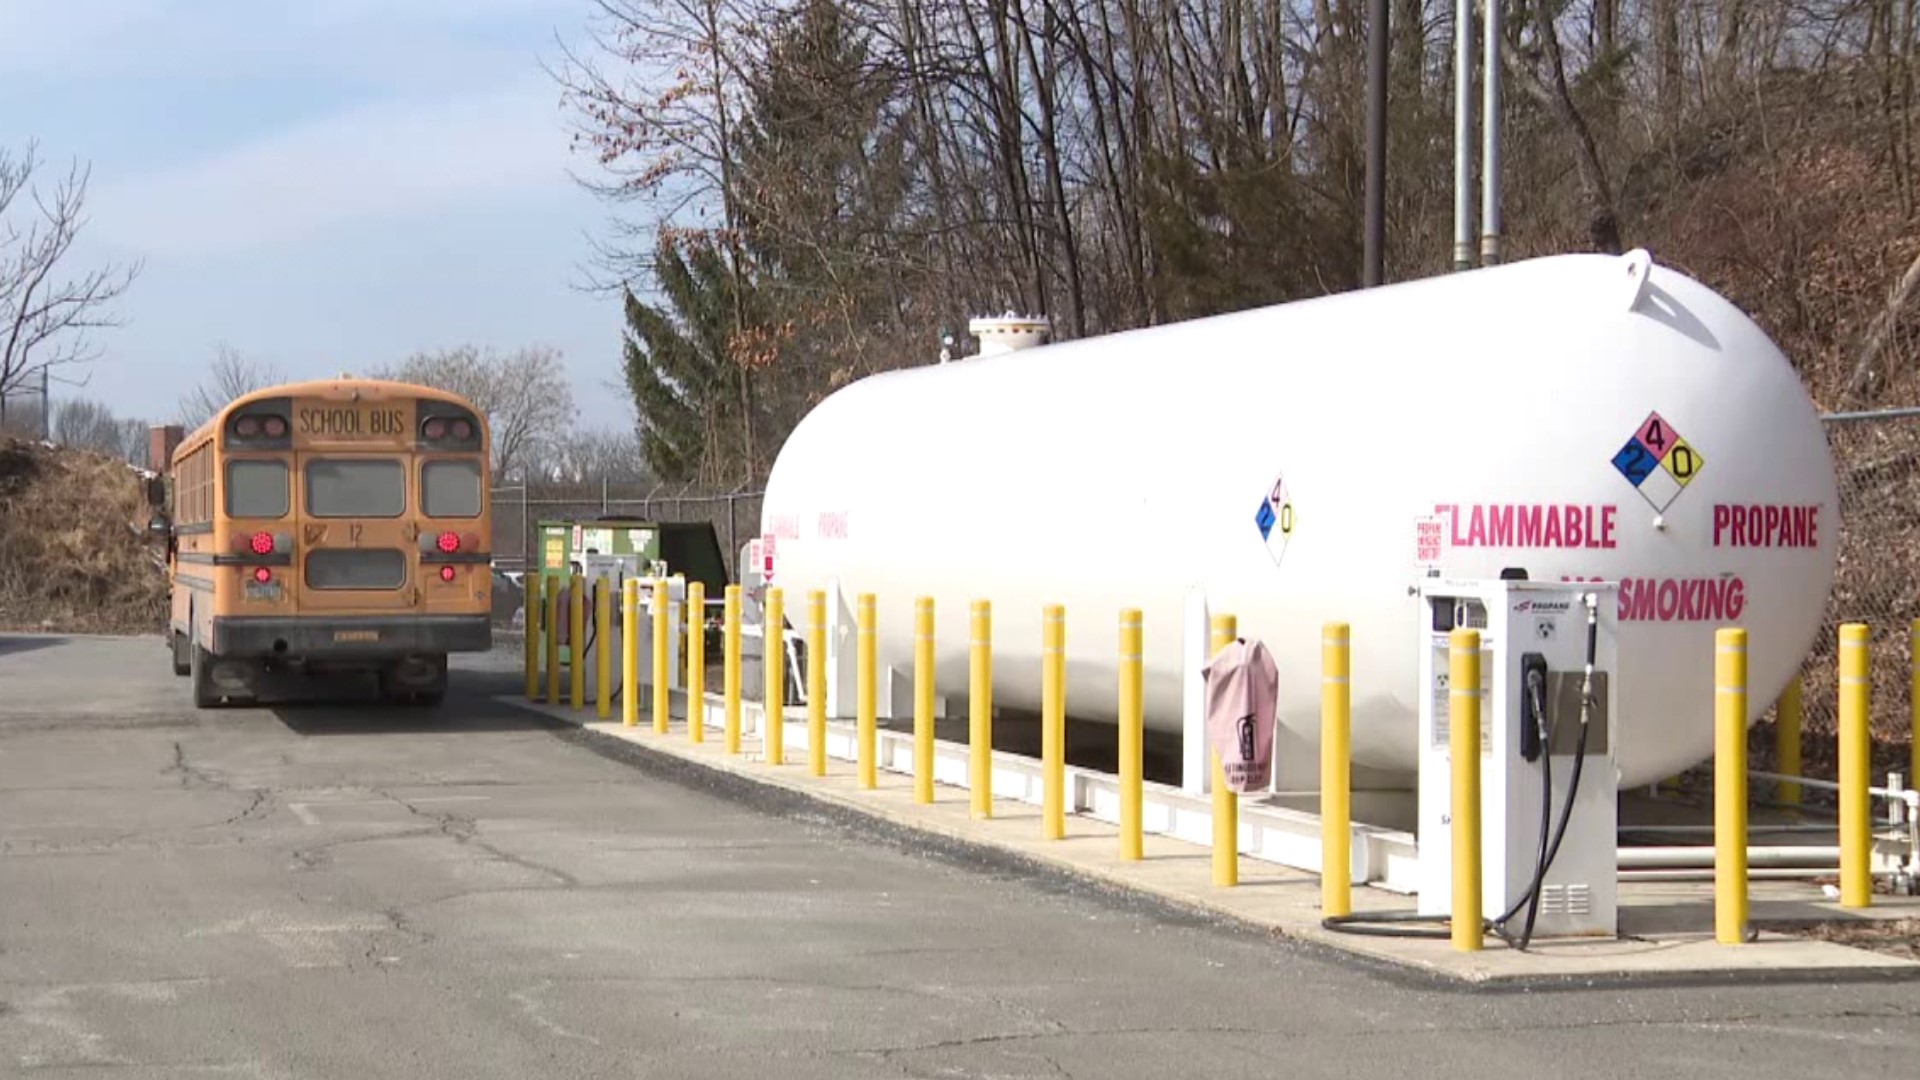 East Stroudsburg Area School District switched over from diesel to liquid propane back in 2020 after securing a federal grant and now they're reaping the benefits.